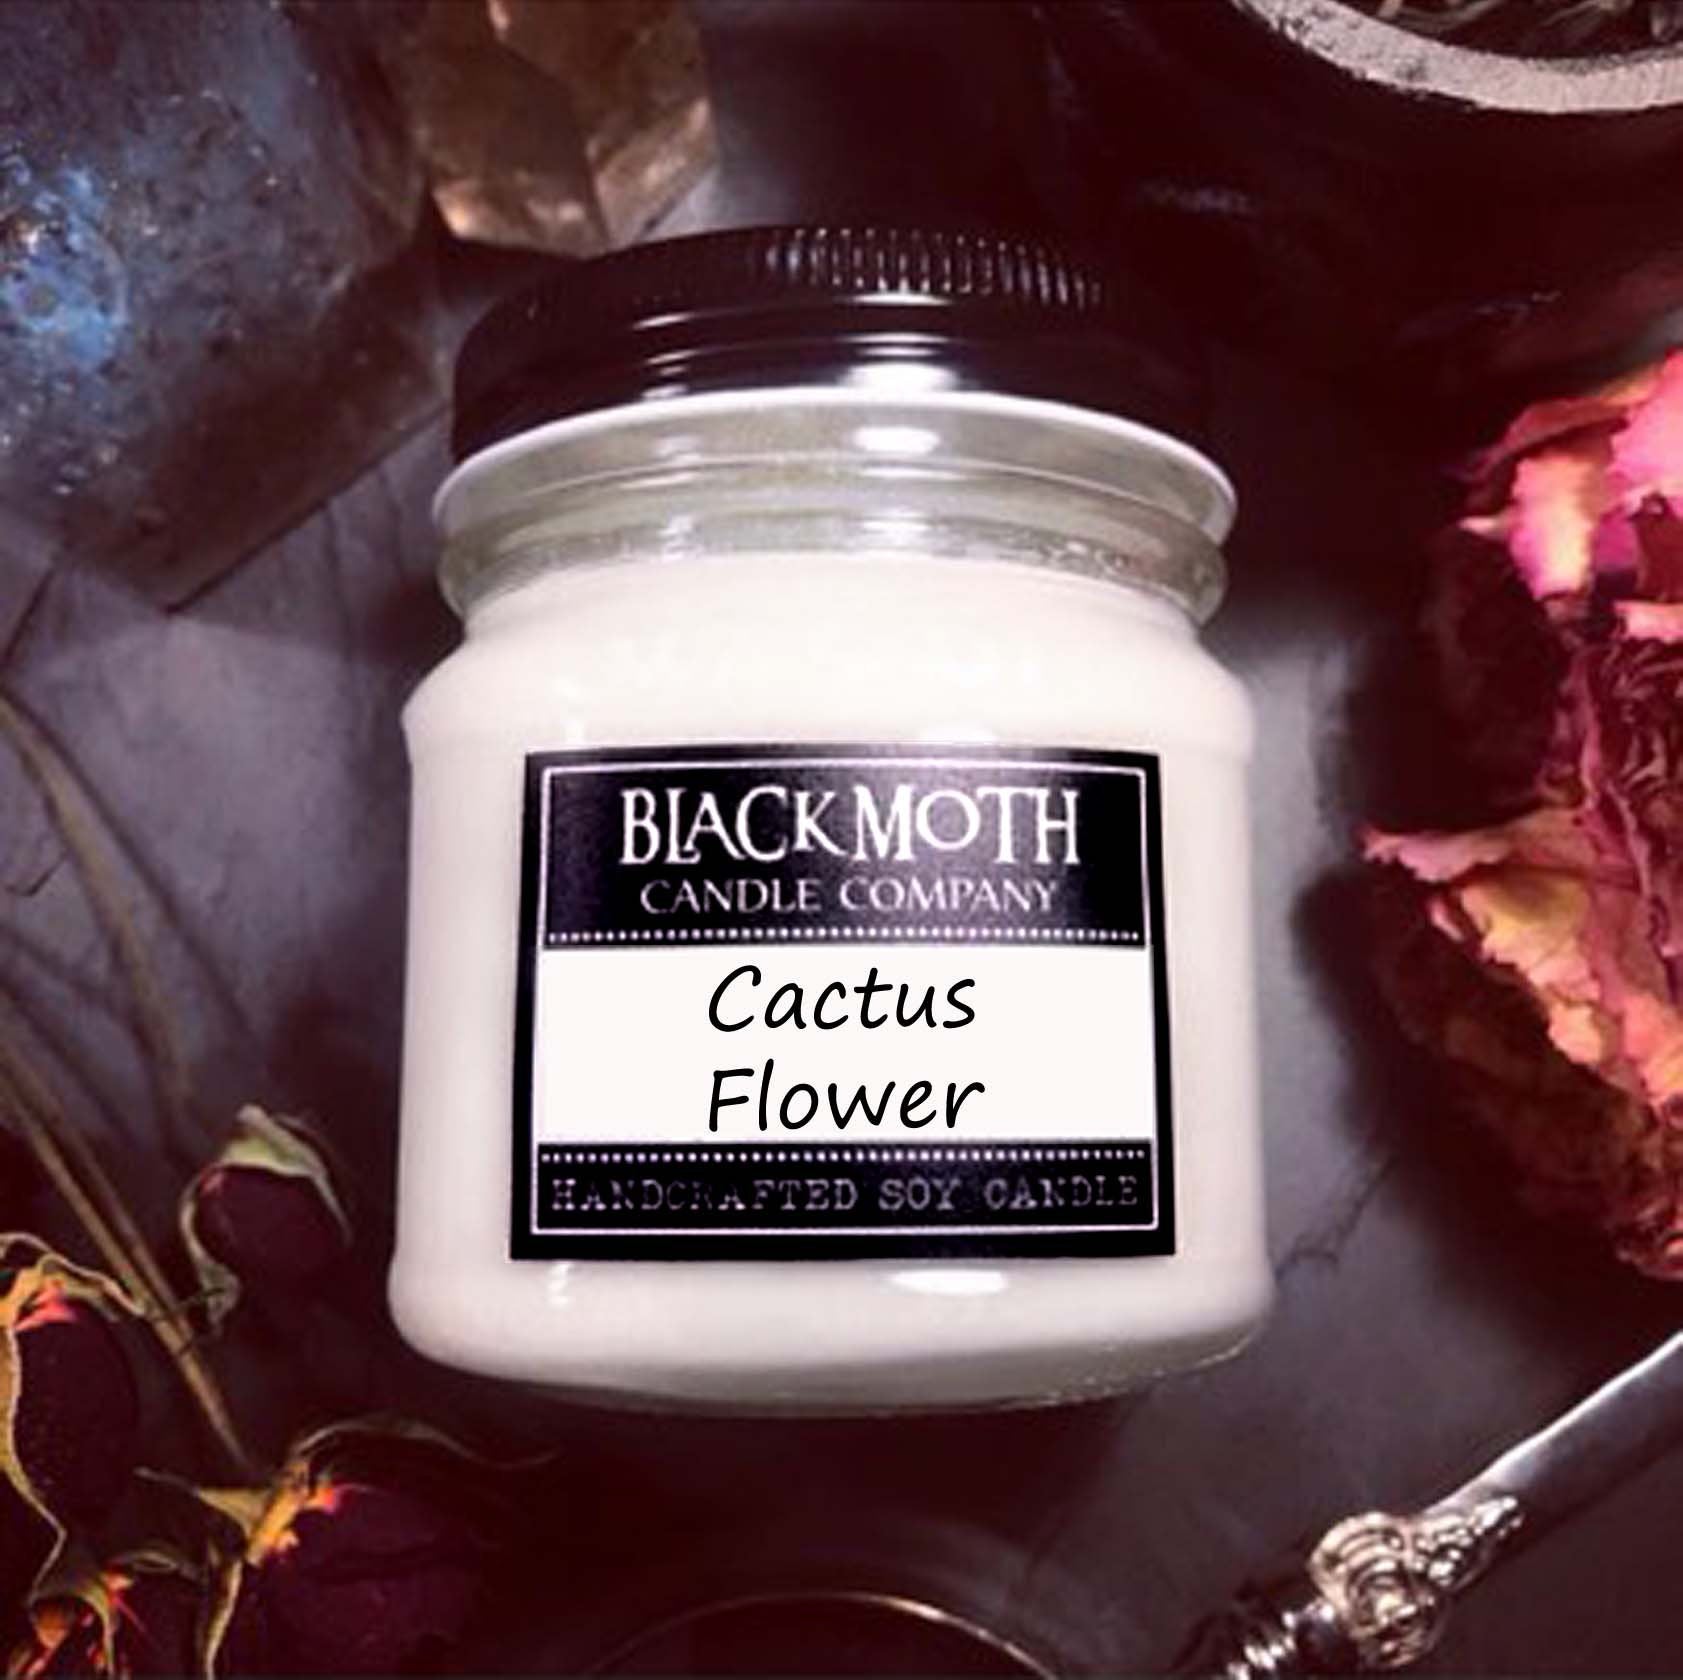 8 oz Cactus Flower Scented Soy Candle in Mason Jar